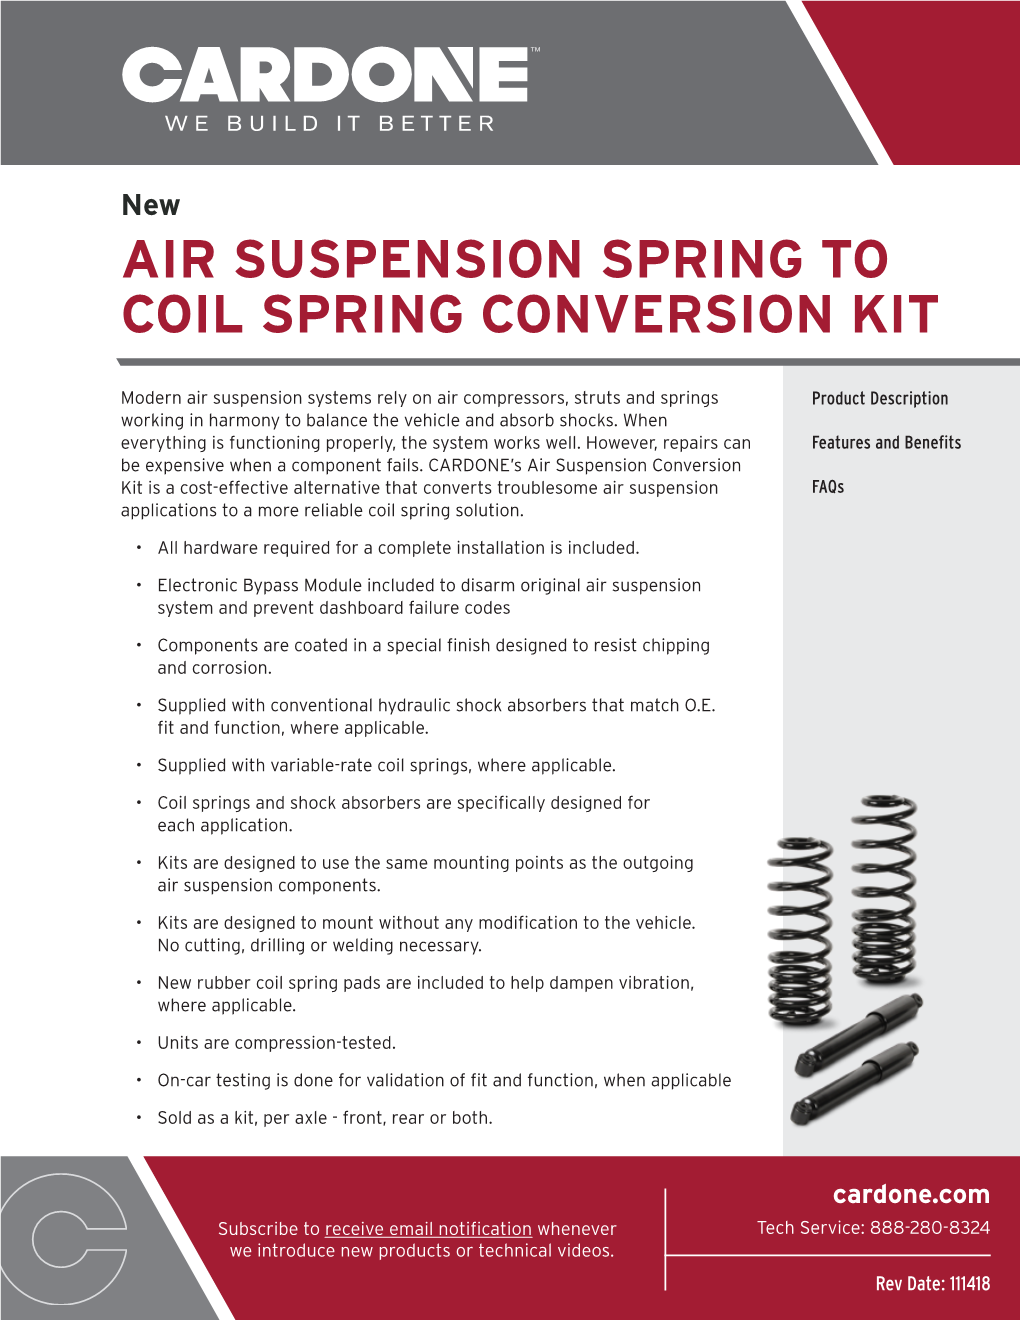 Air Suspension Spring to Coil Spring Conversion Kit